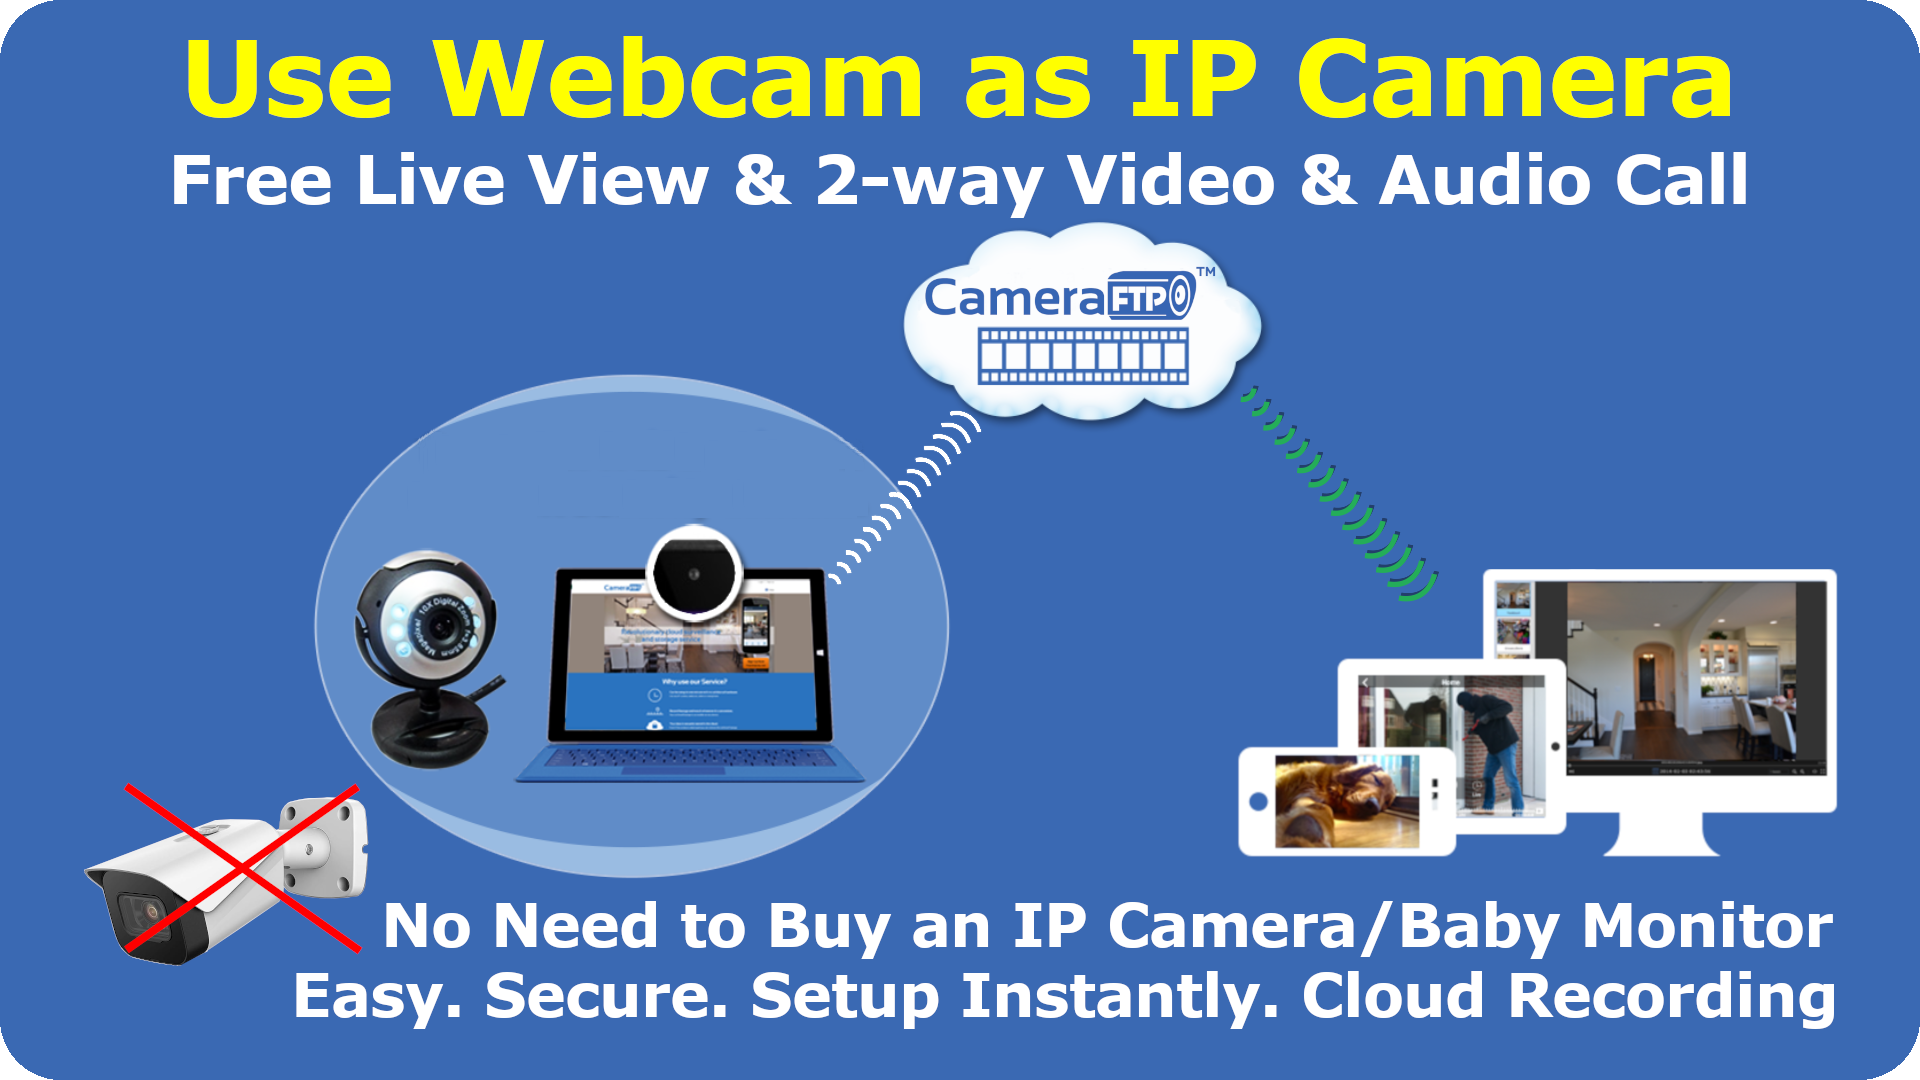 Use webcam as IP camera. Save IP camera cost, works better than IP camera and baby/pet monitor. Easy, secure, setup instantly. Cloud Recording